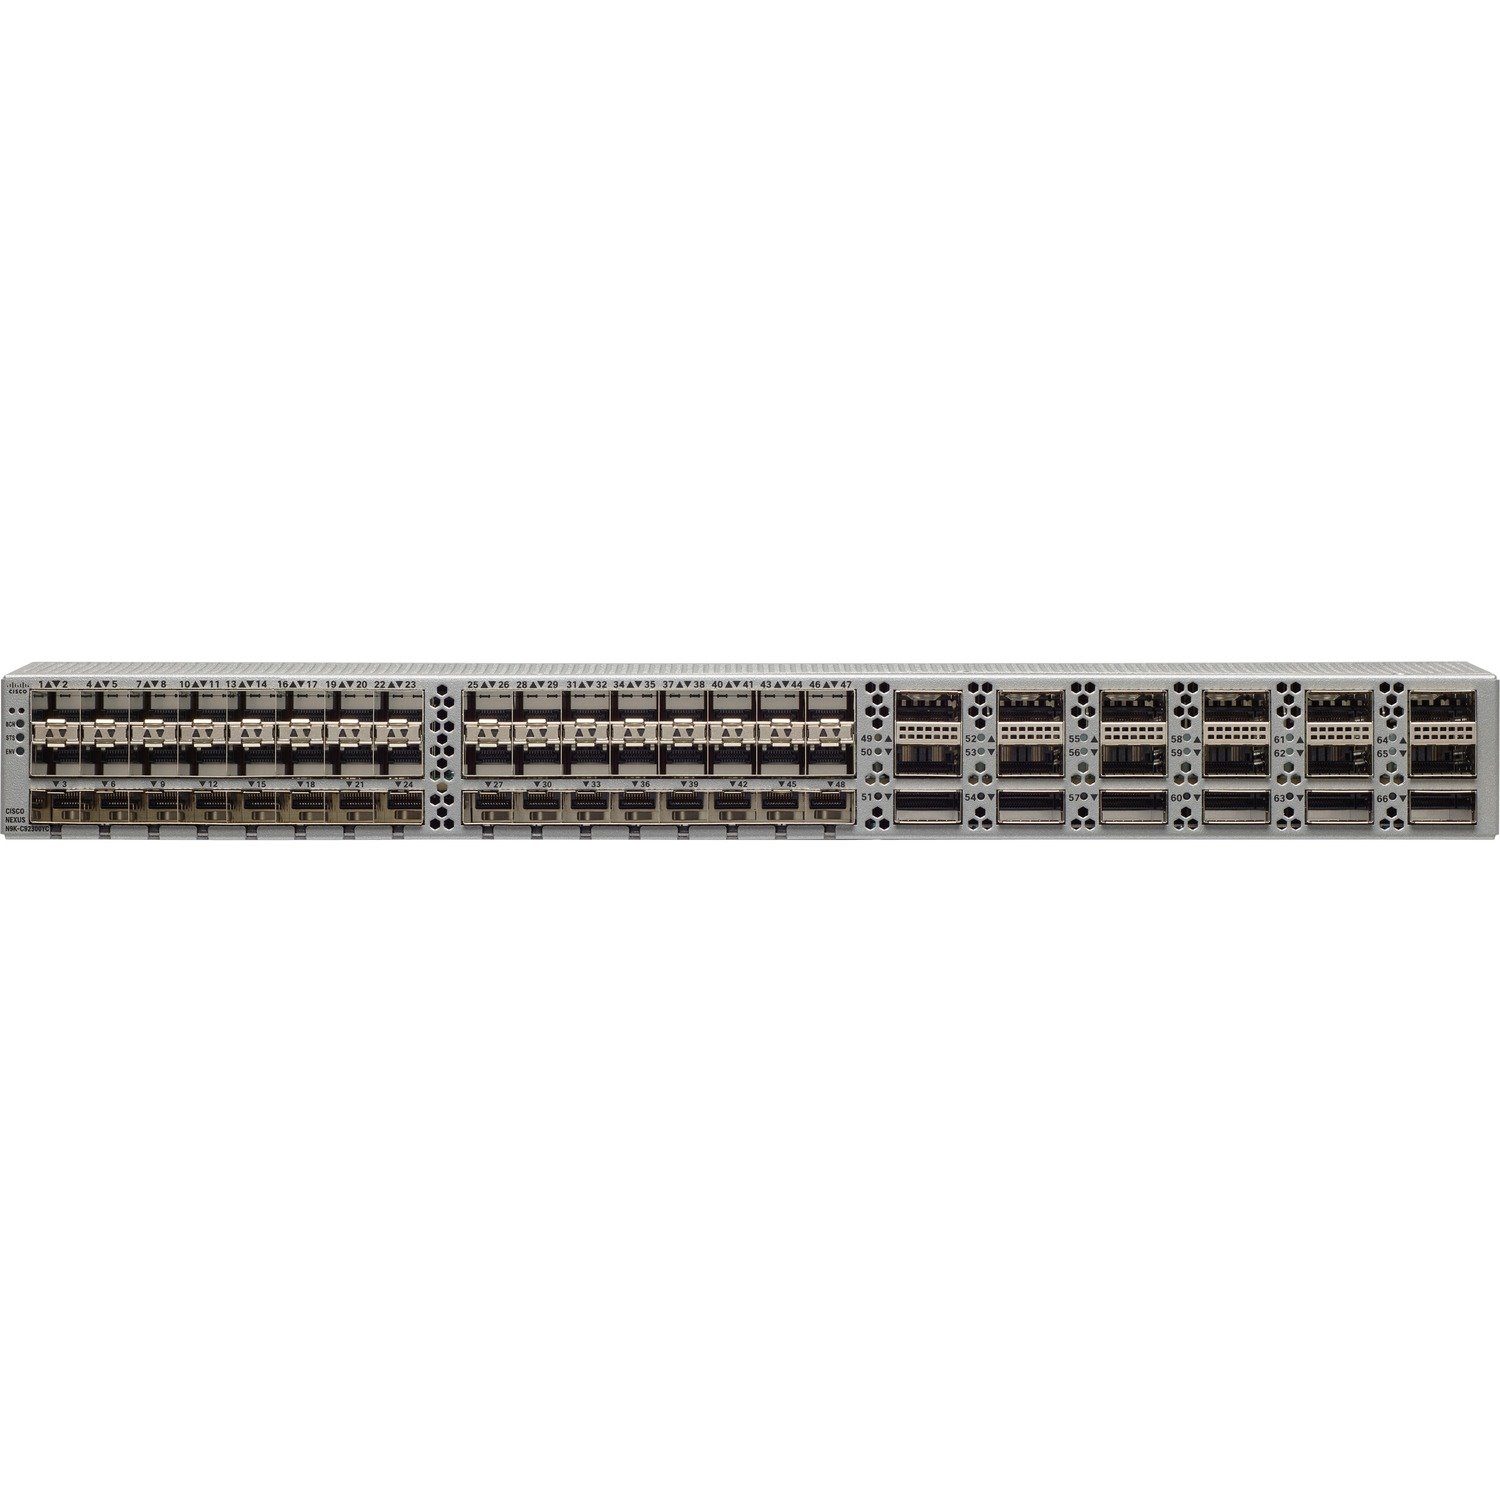 Cisco Nexus 9200 with 48p 10/25 Gbps and 18p 100G QSFP28